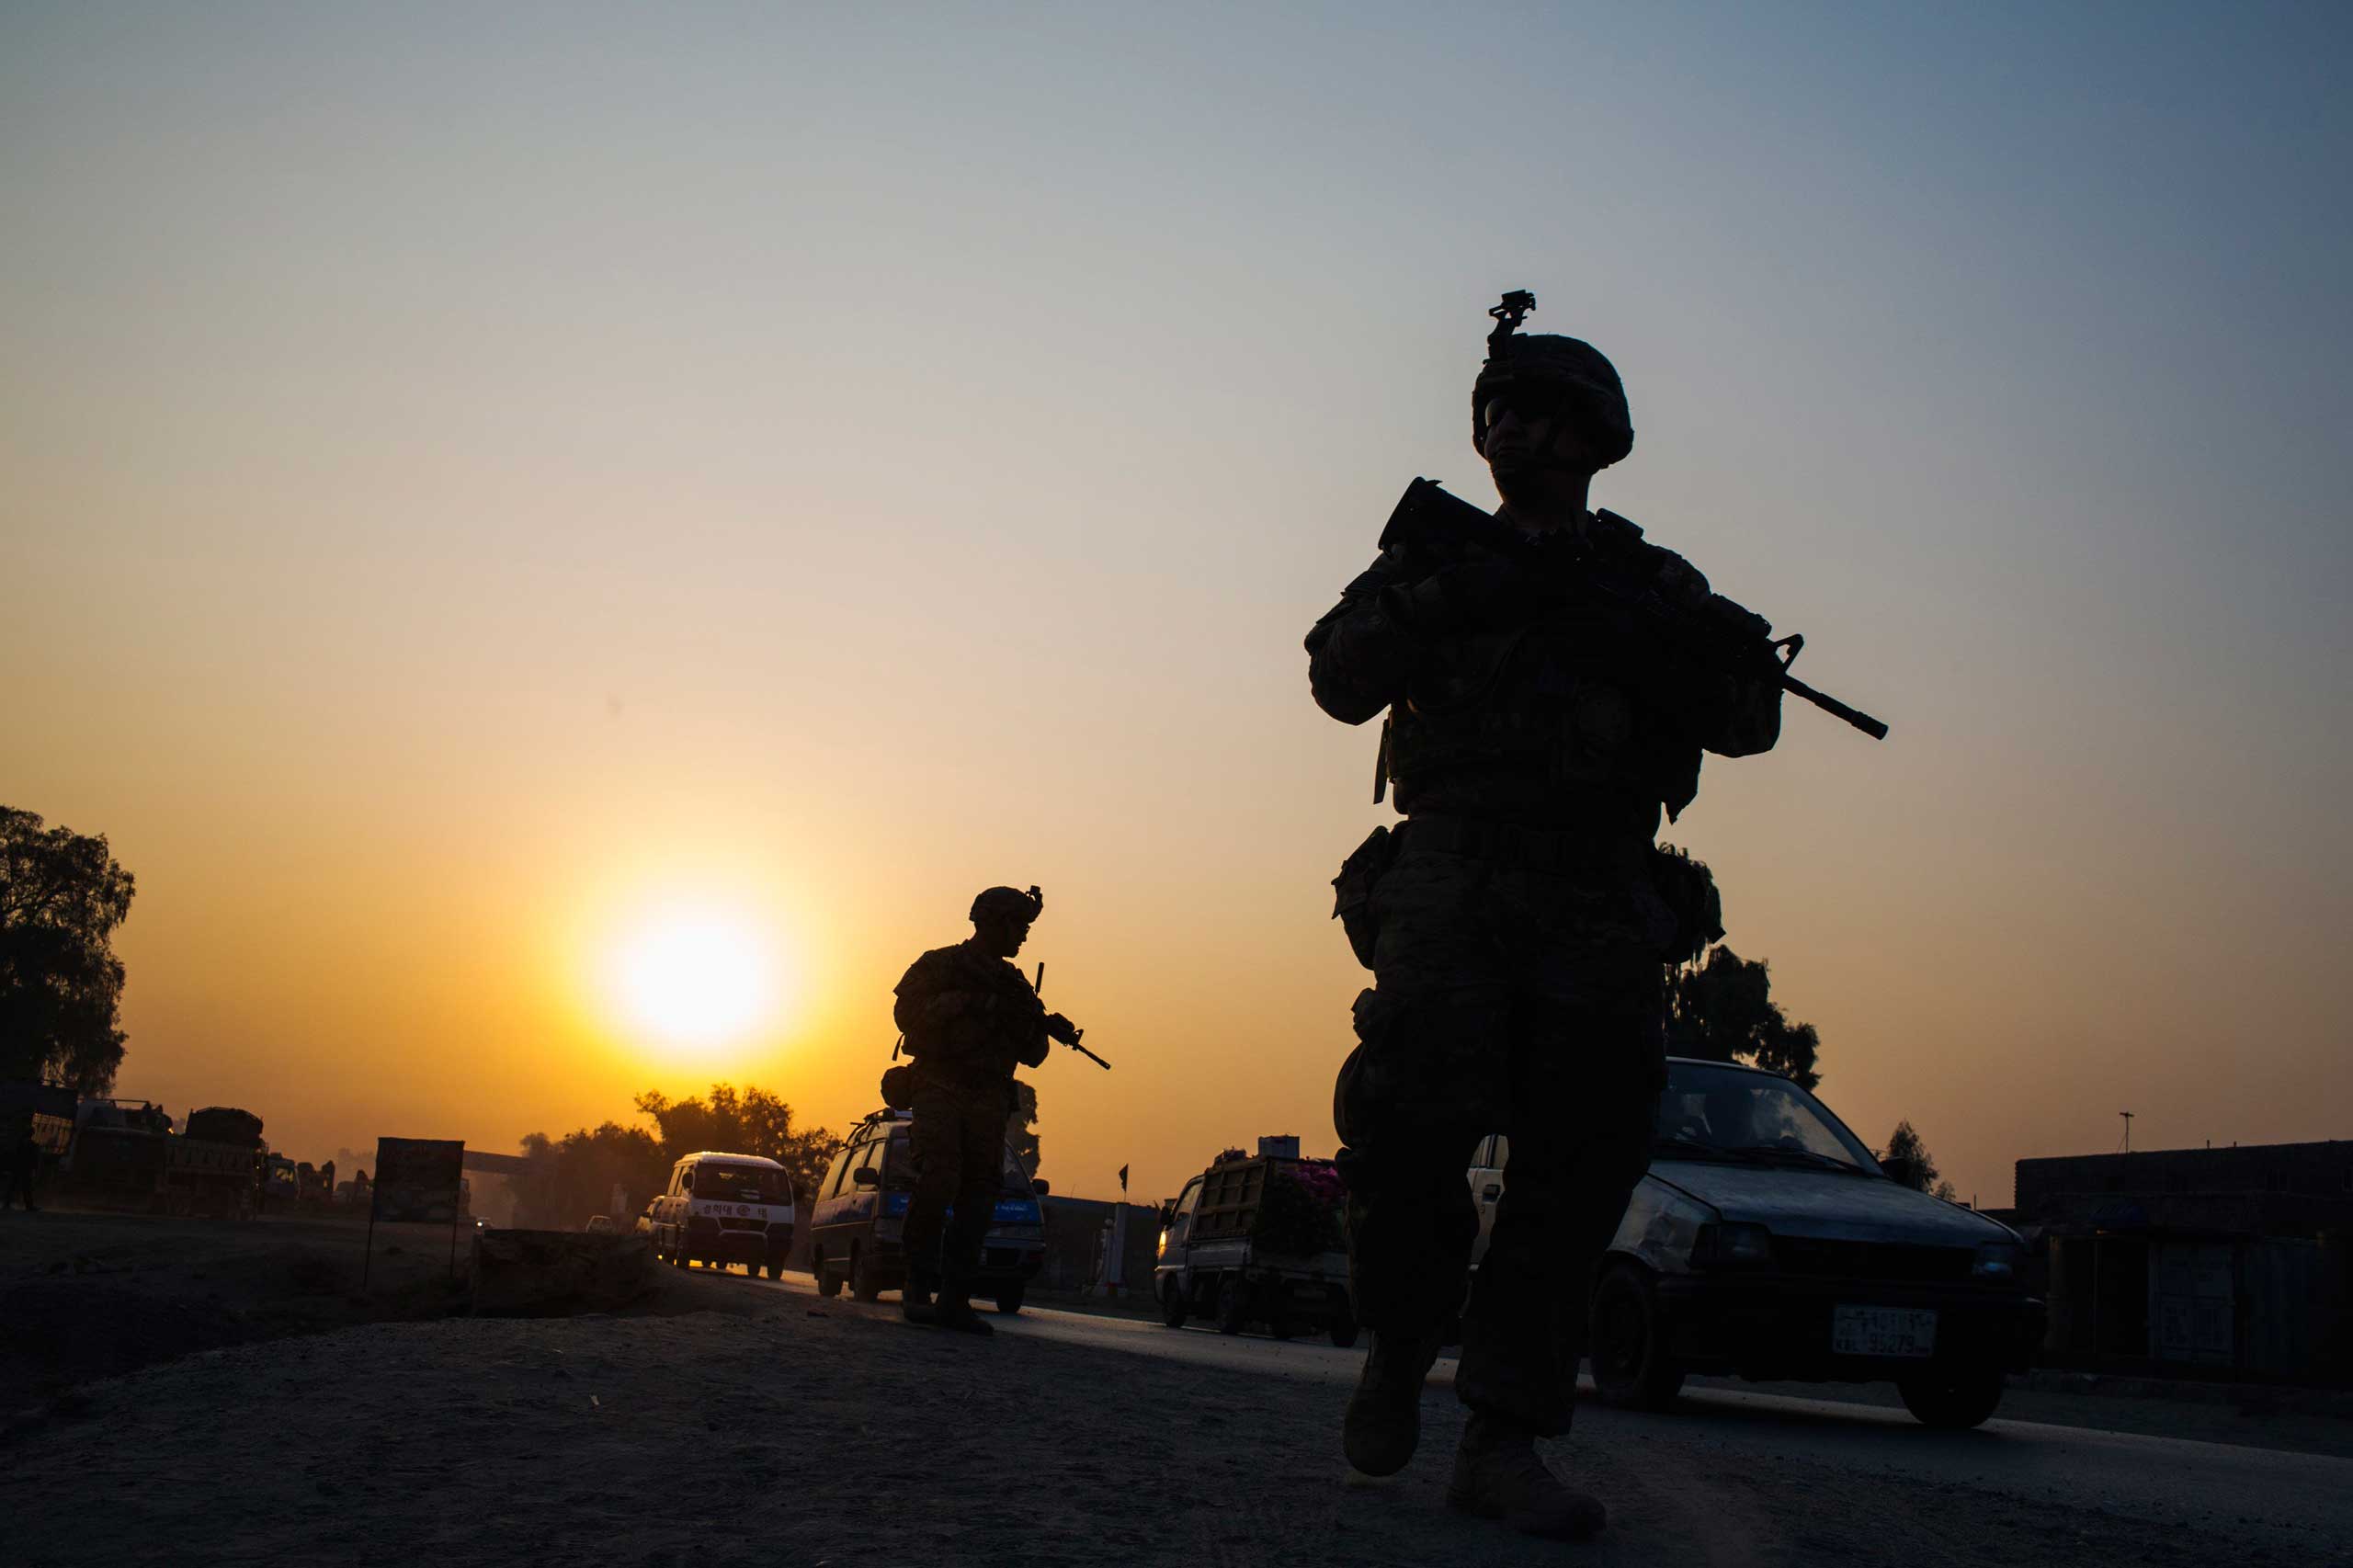 U.S. soldiers from Grim Company of the 3rd Cavalry Regiment walk down the street near an Afghan police checkpoint during a mission near Forward Operating Base Fenty in the Nangarhar province of Afghanistan on Dec. 19, 2014.